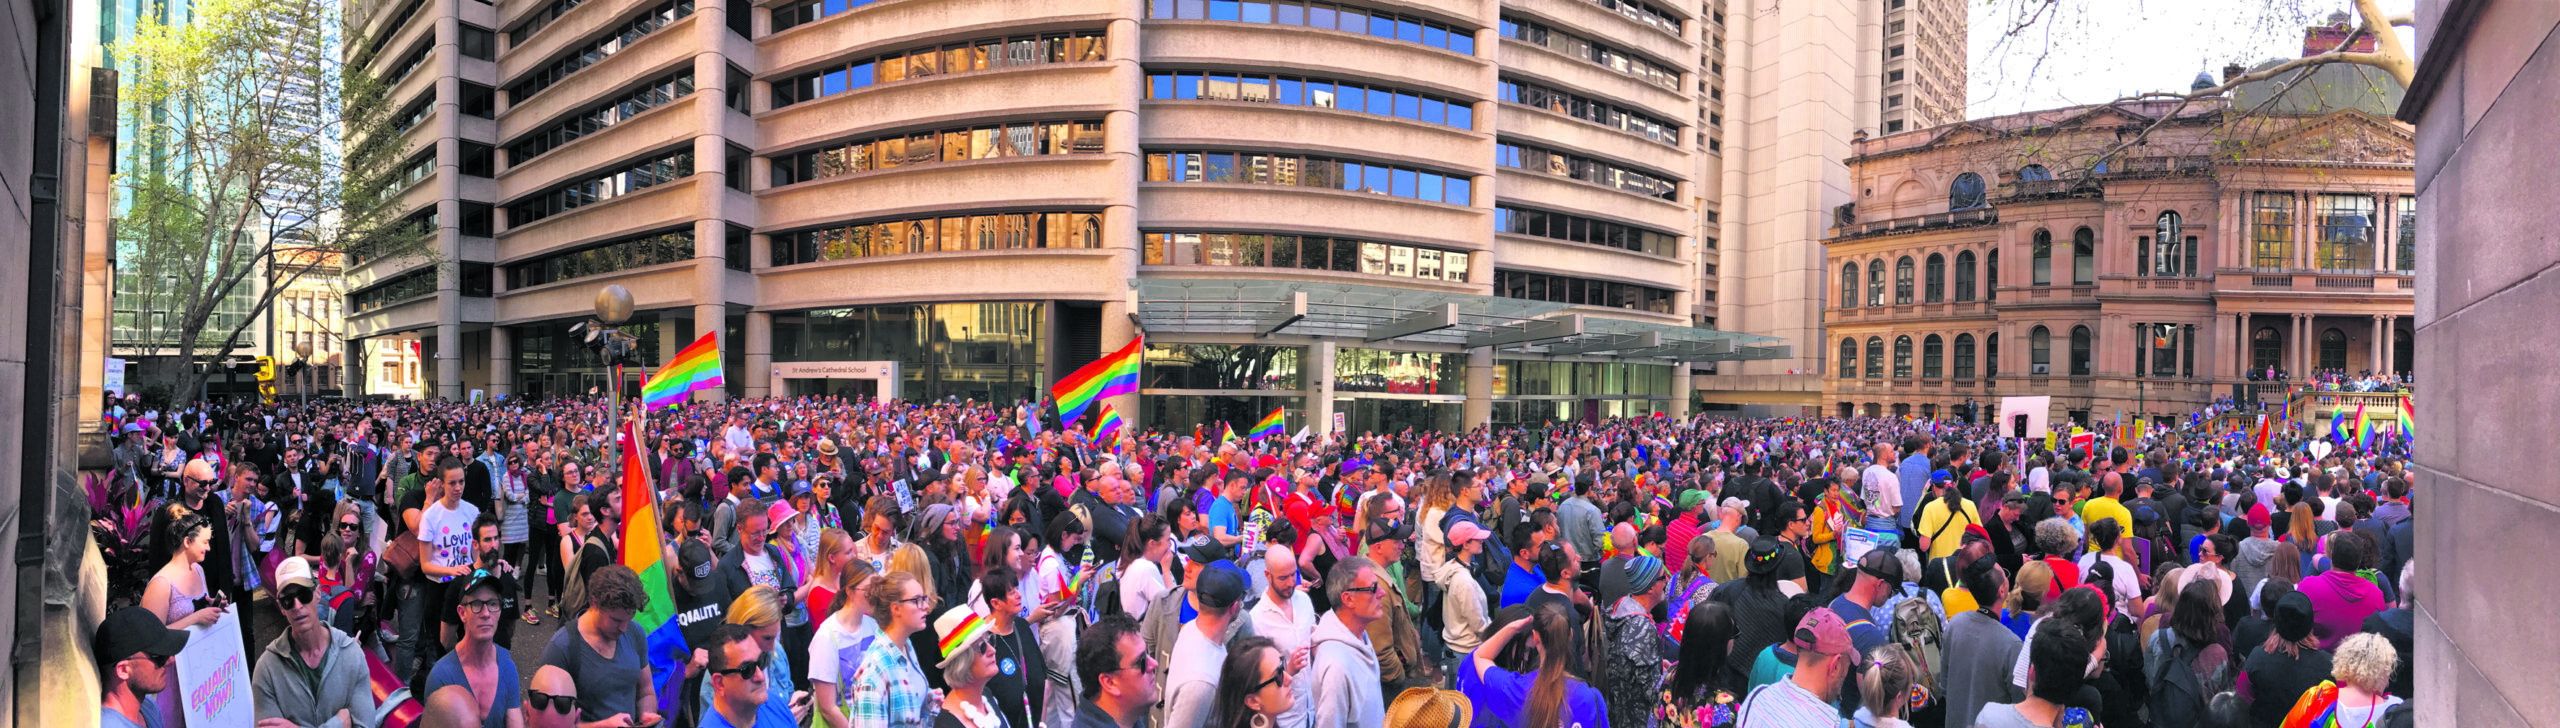 Sydney marches for equality